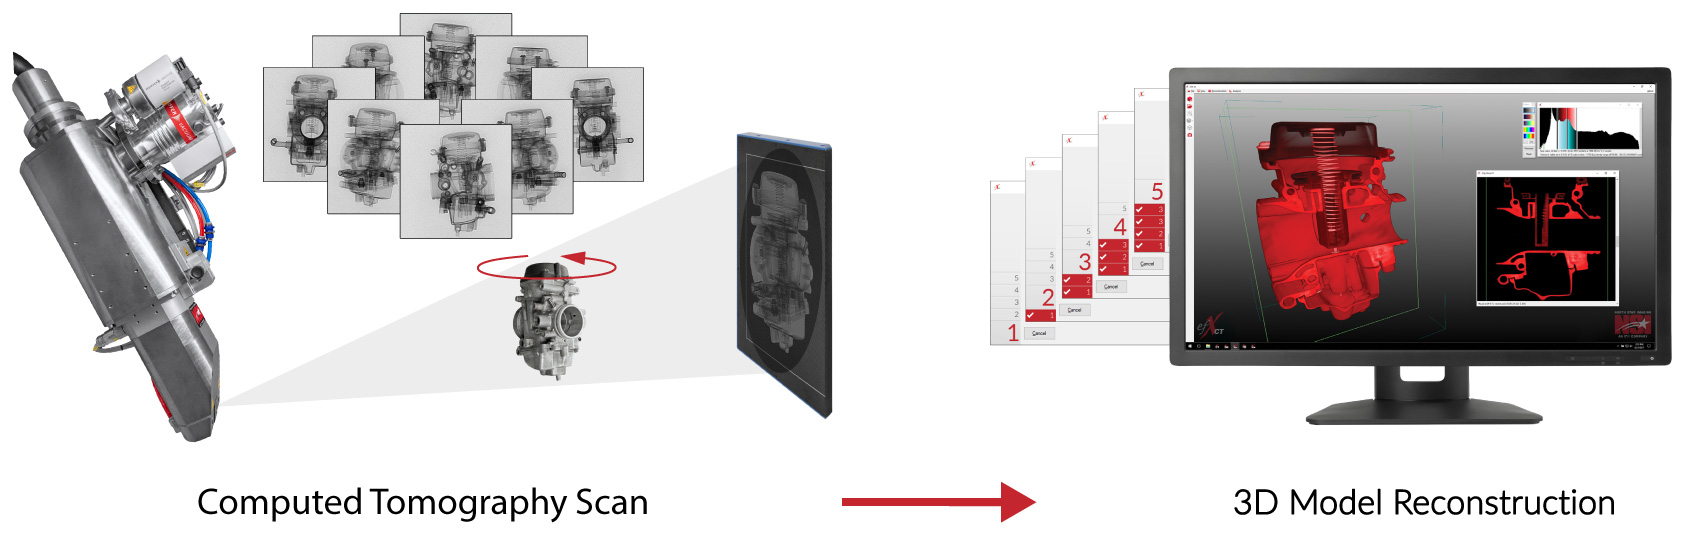 Computed tomography x-ray scan process